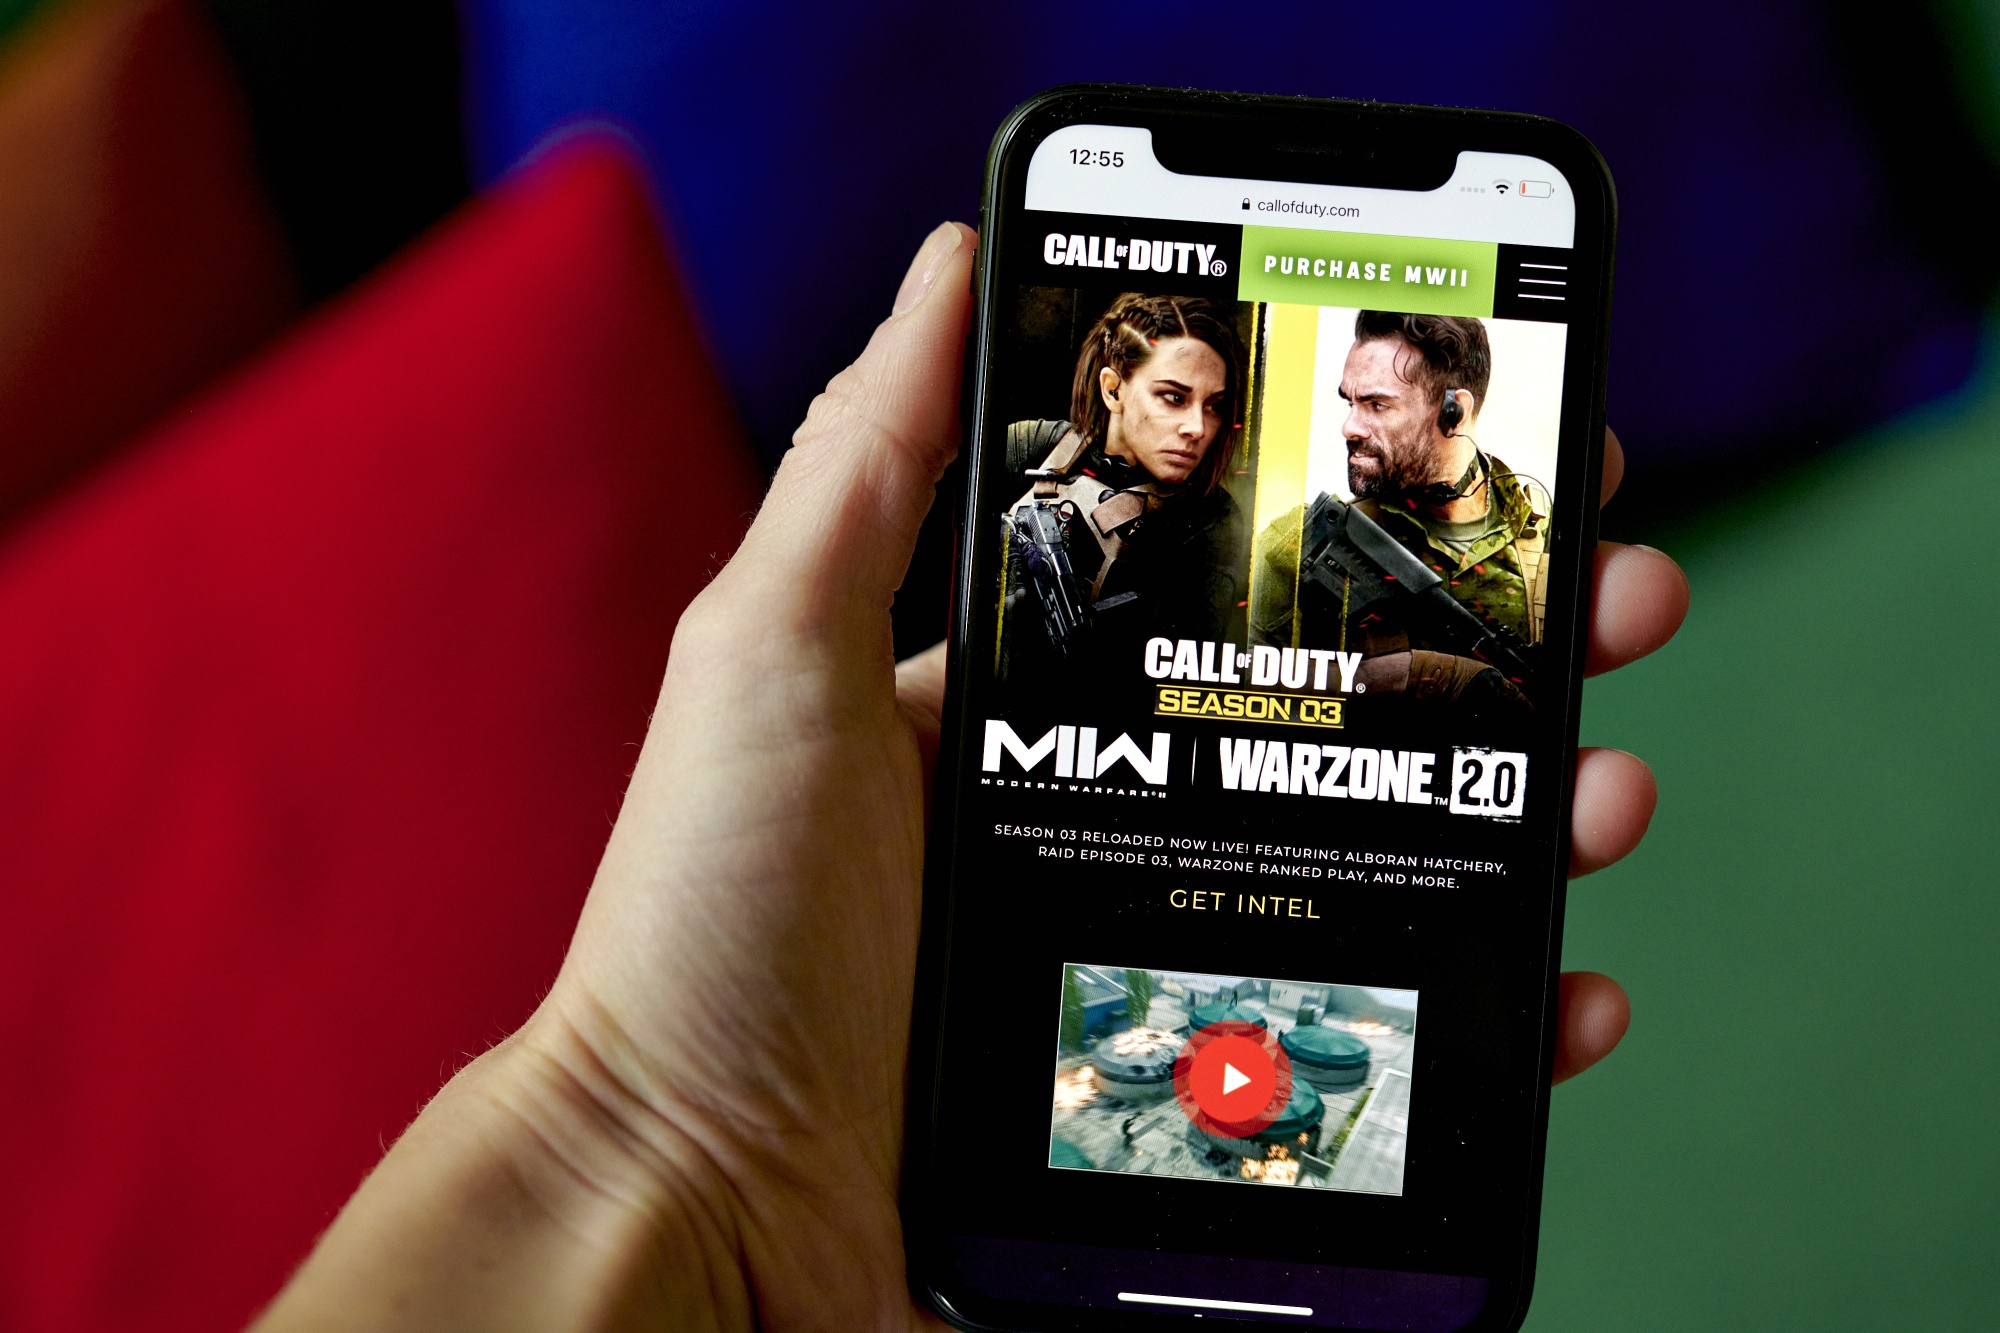 Microsoft closes deal to buy Call of Duty maker Activision Blizzard after  antitrust fights